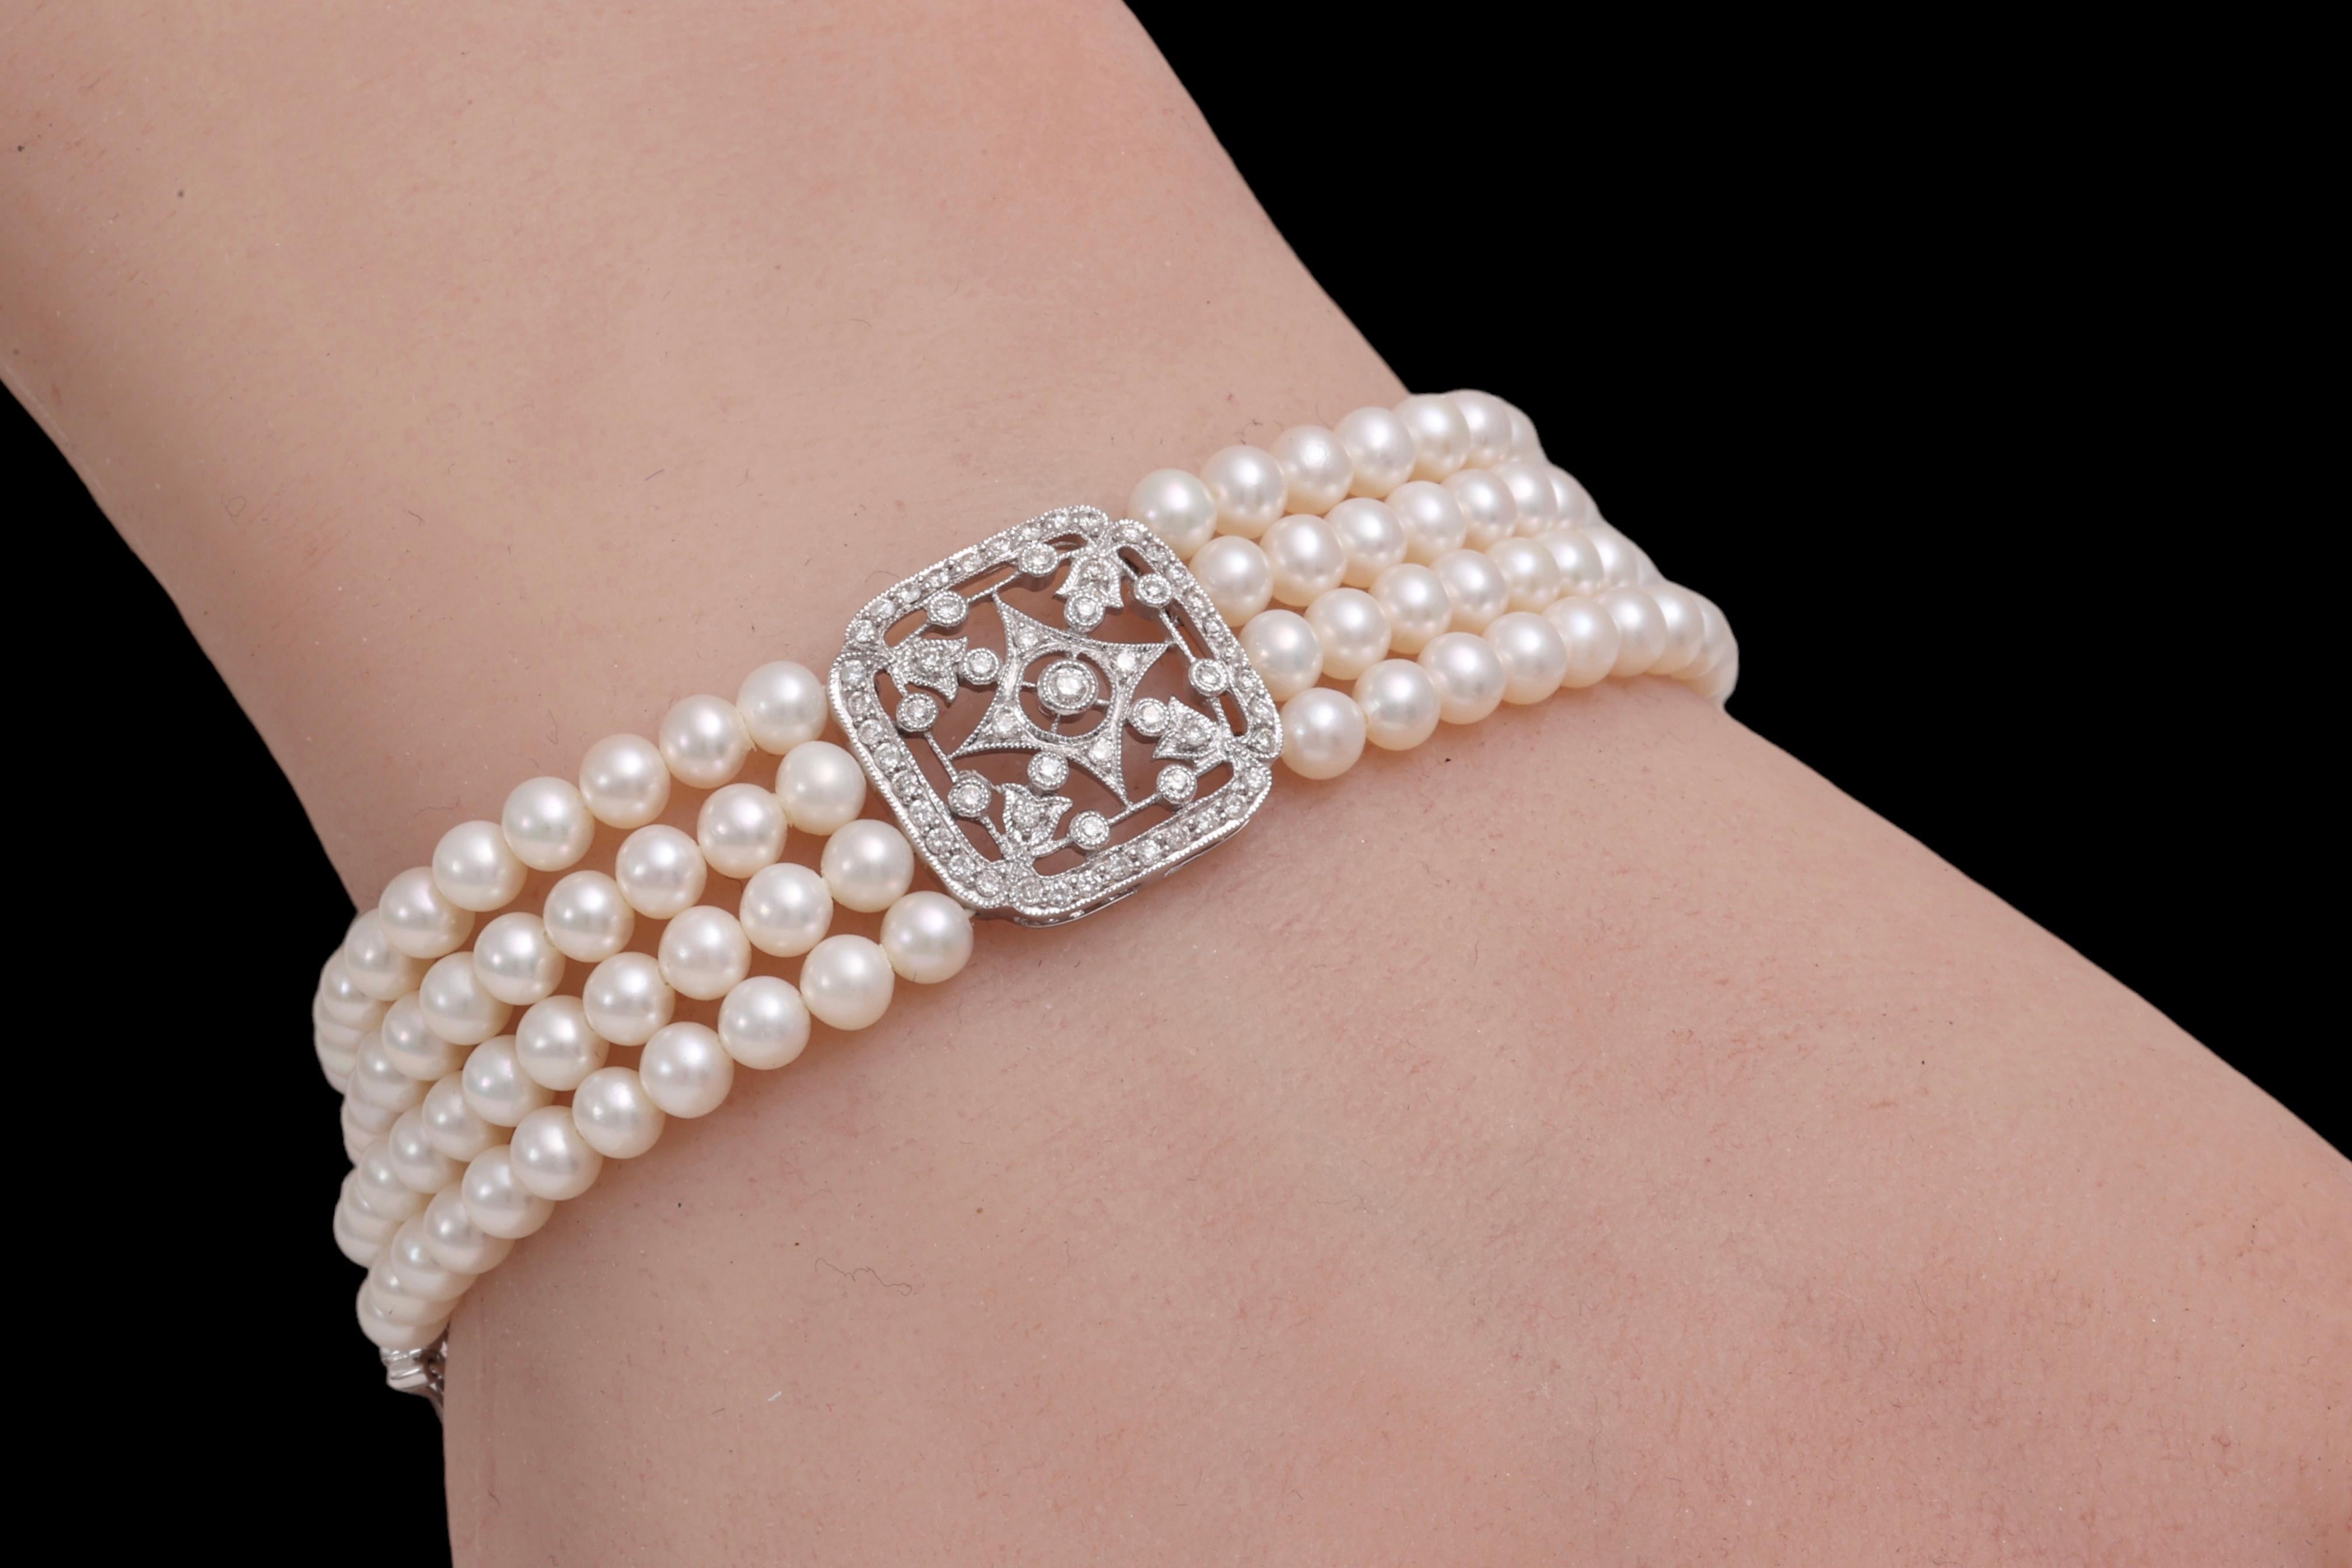 Brilliant Cut 18 kt. White Gold Bracelet with 4 Rows of Pearls and 1.06 ct. Diamonds For Sale